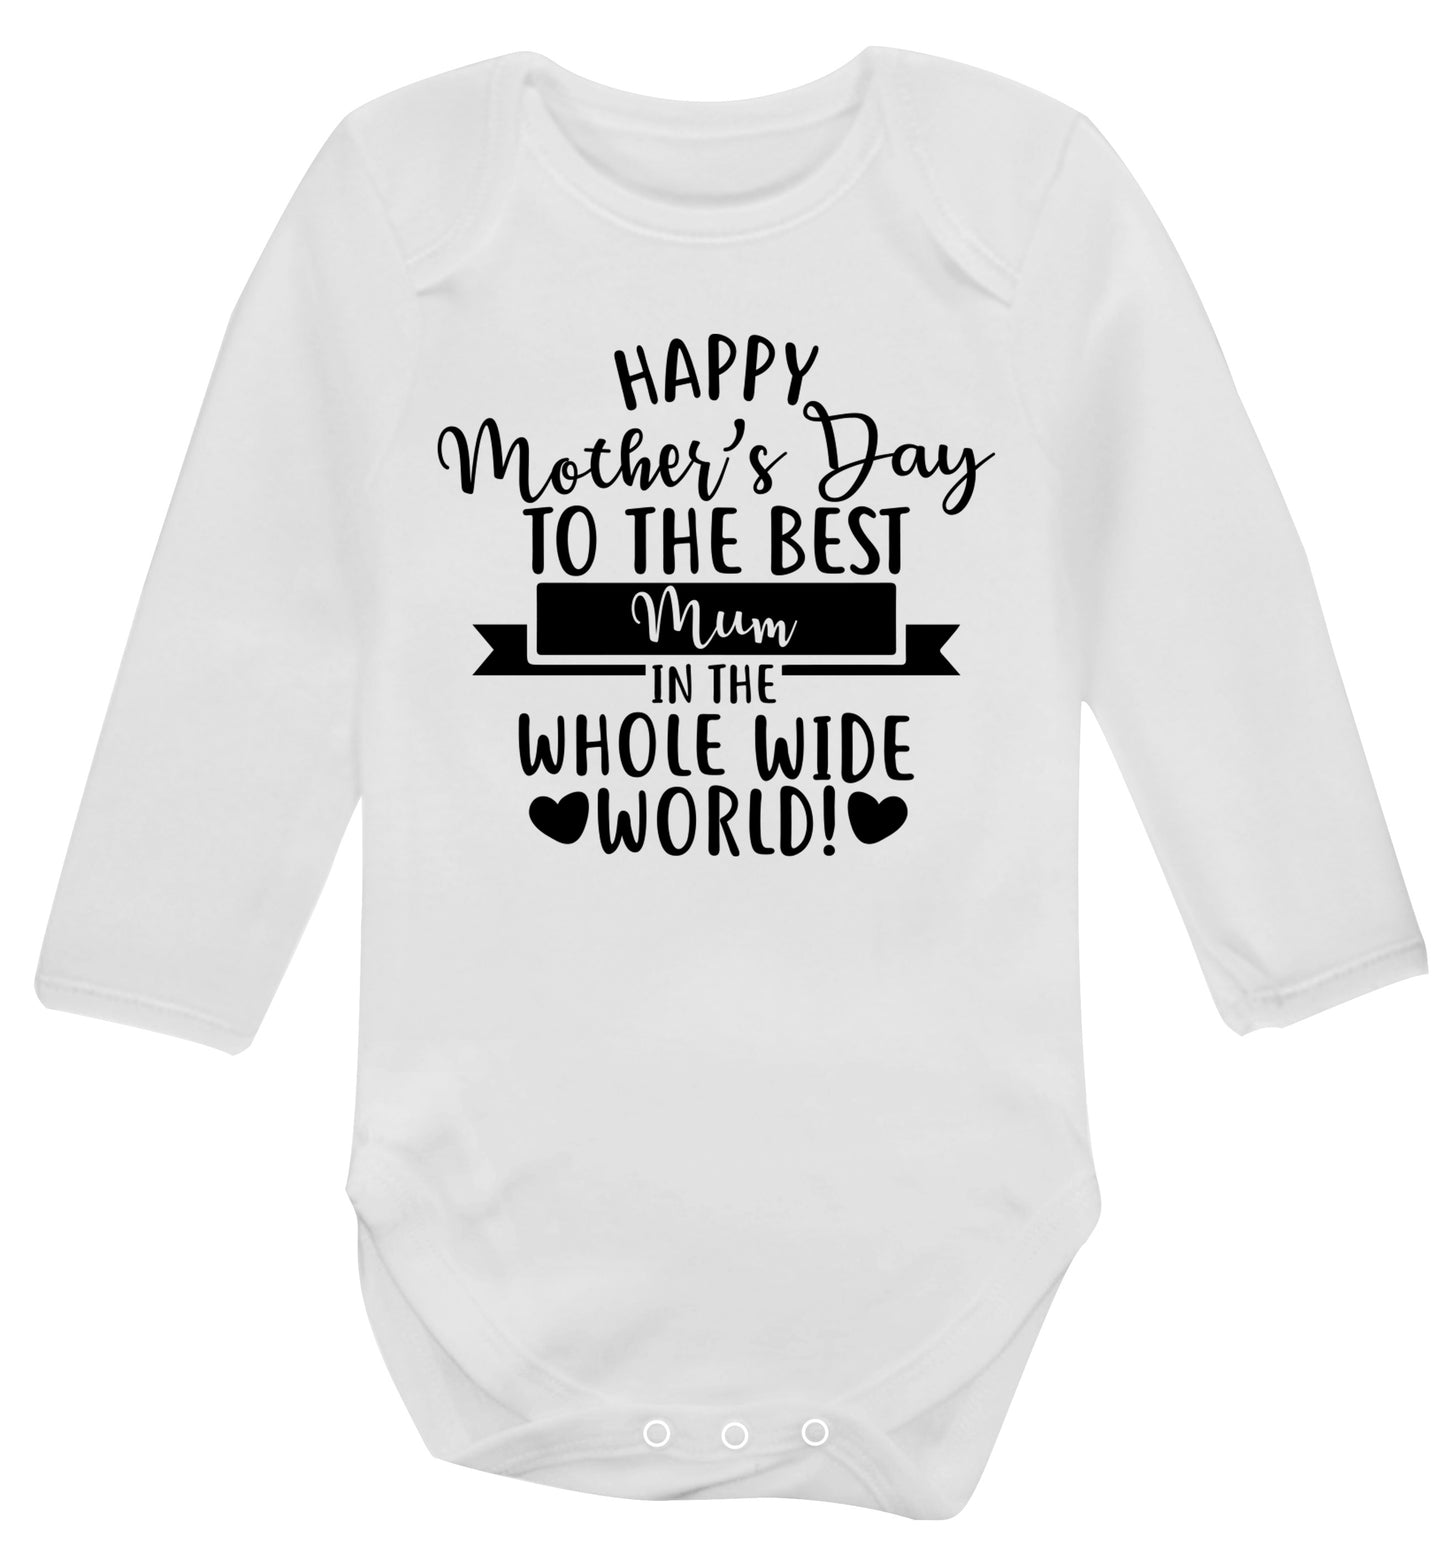 Happy Mother's Day to the best mum in the whole wide world! Baby Vest long sleeved white 6-12 months